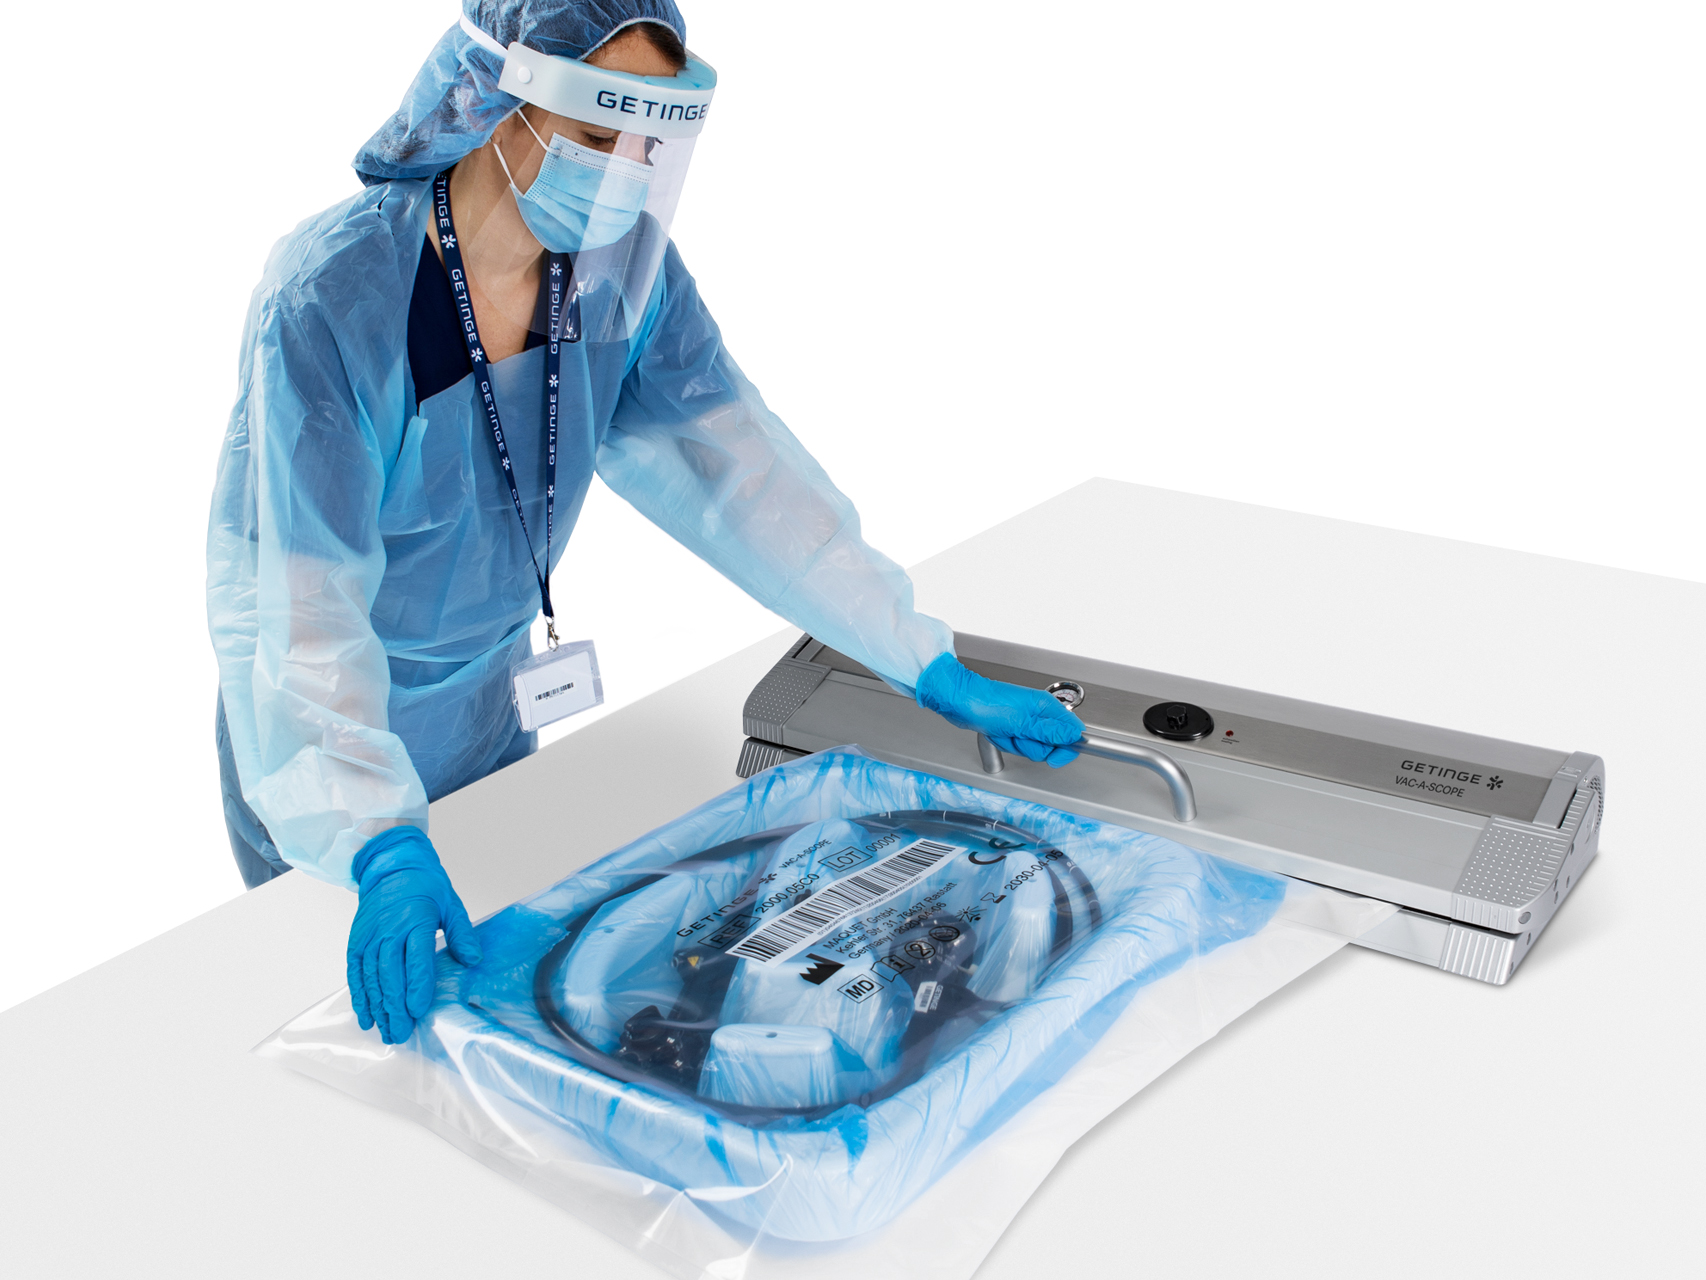 Operator working with Getinge Vac-a-Scope system for flexible endoscopes